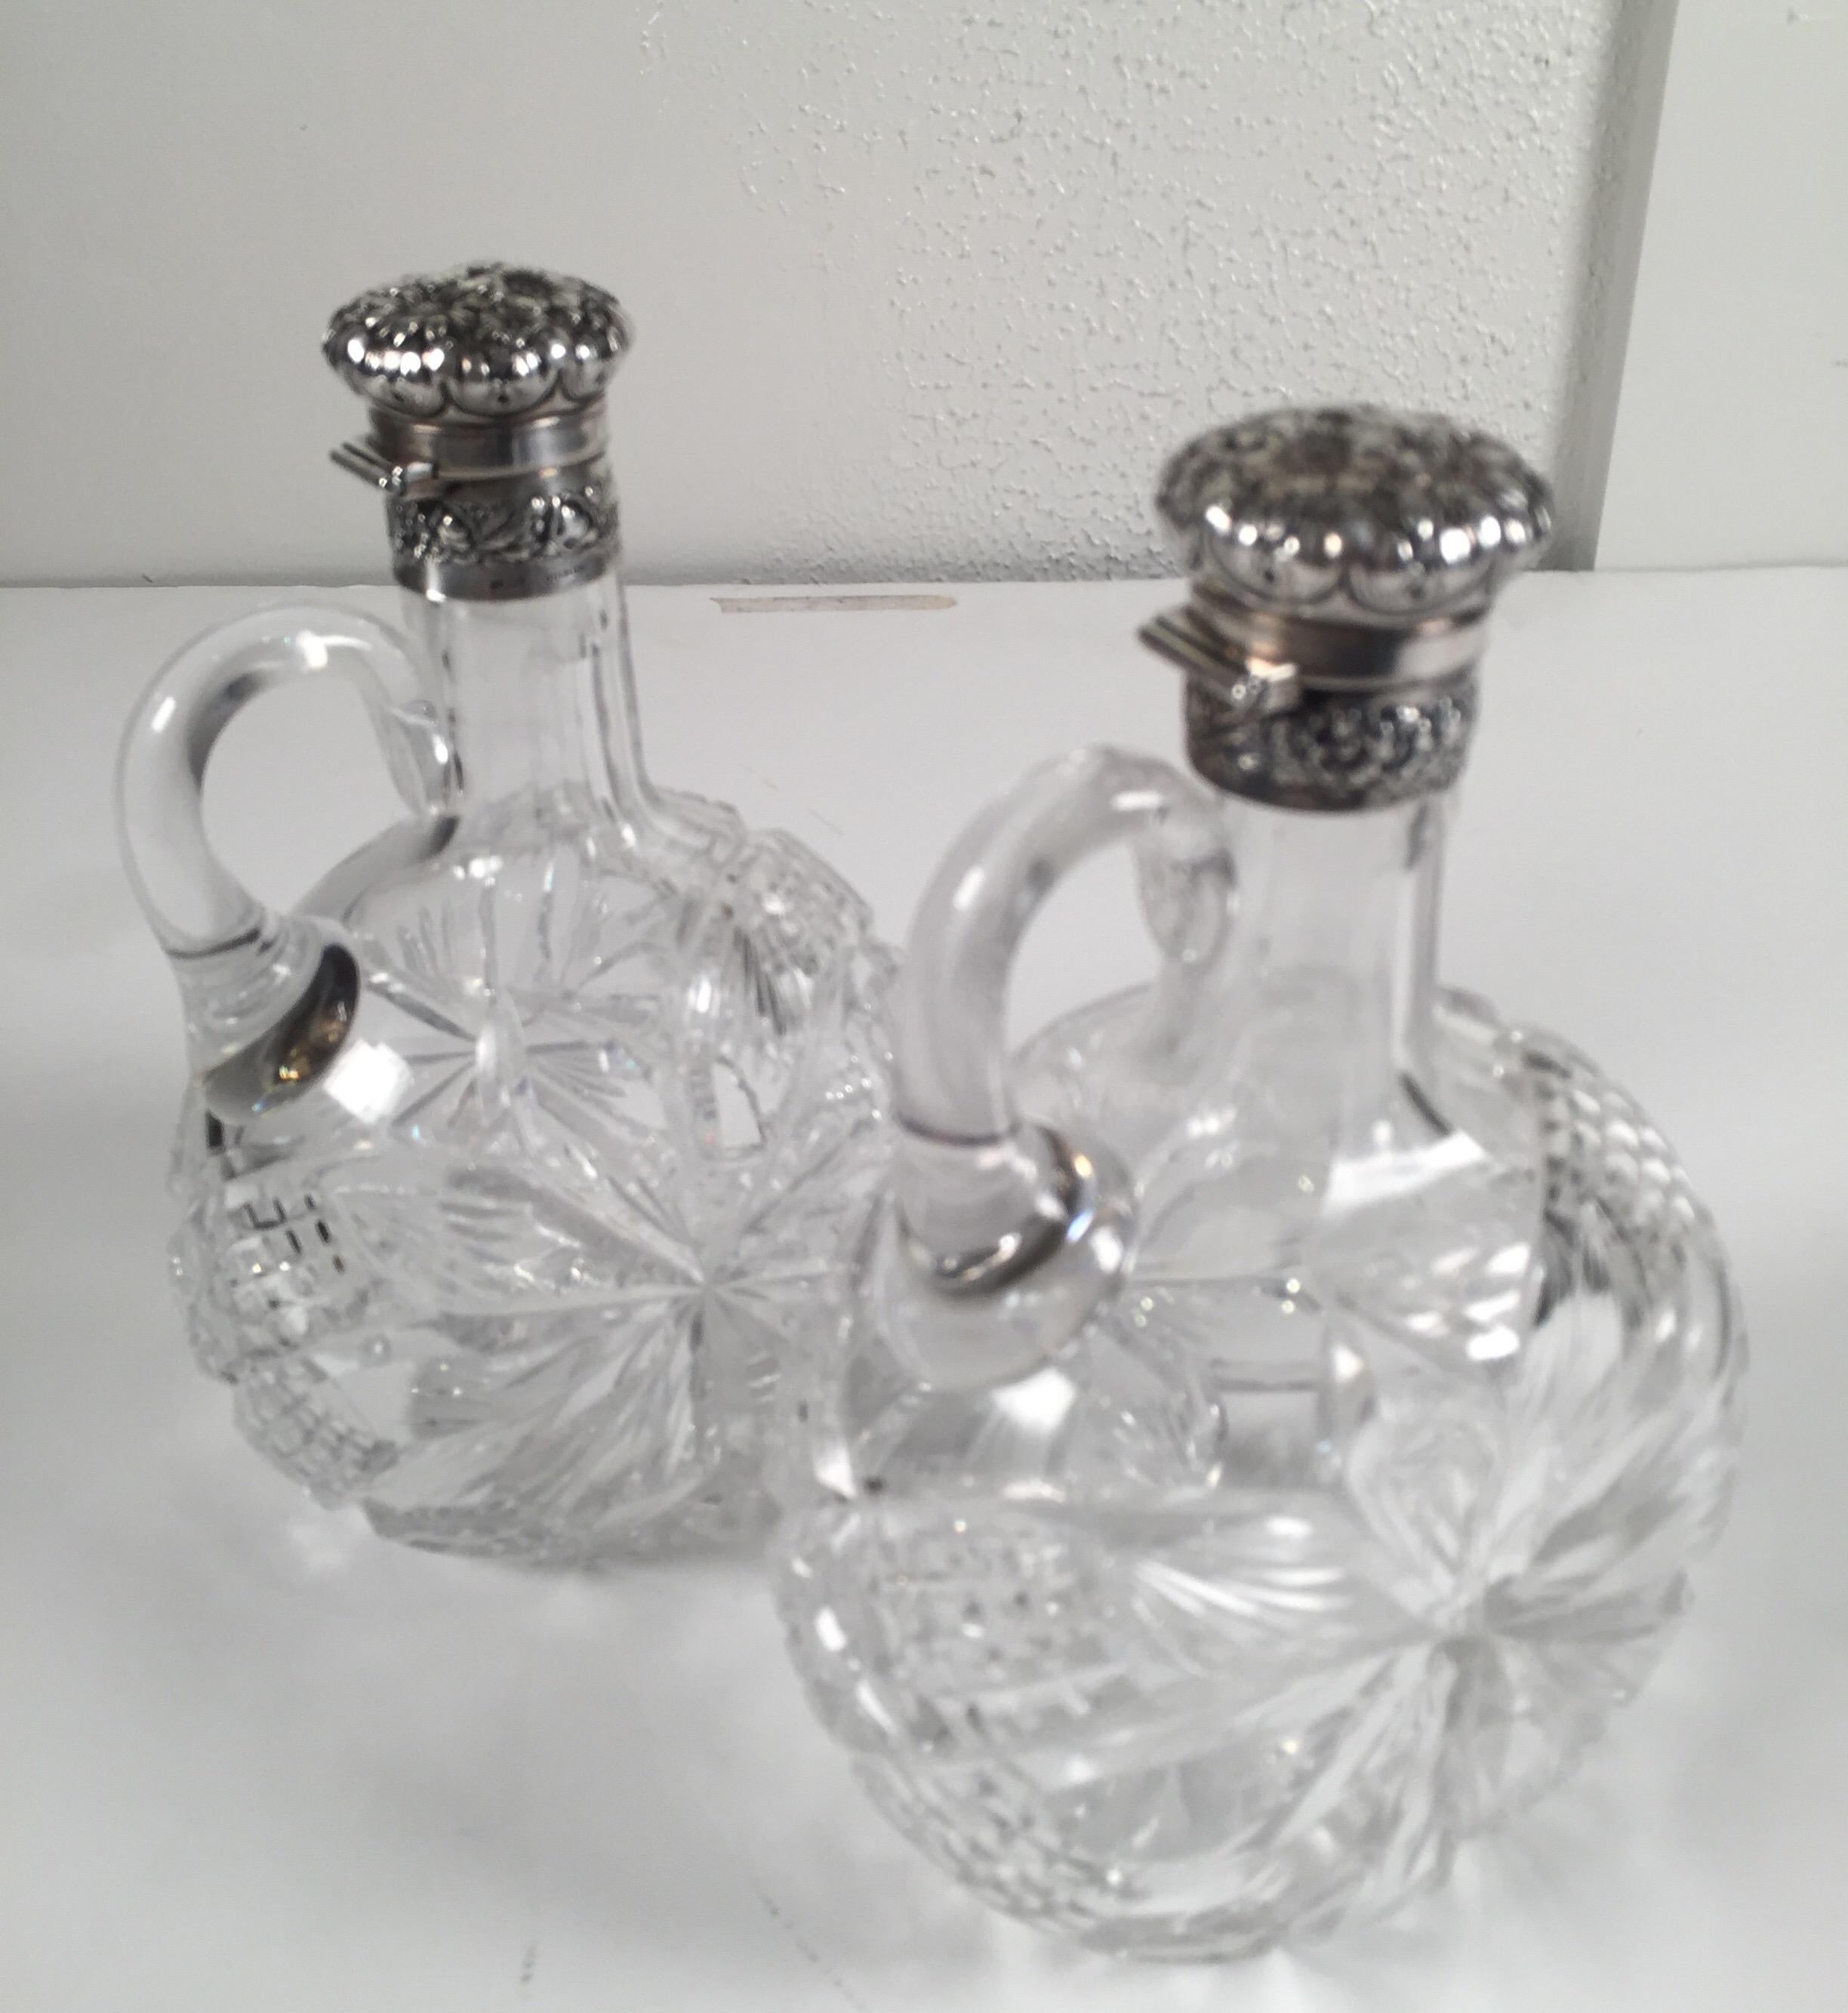 American Fine Pair of 19th Century Gorham Sterling and Cut Glass Decanters